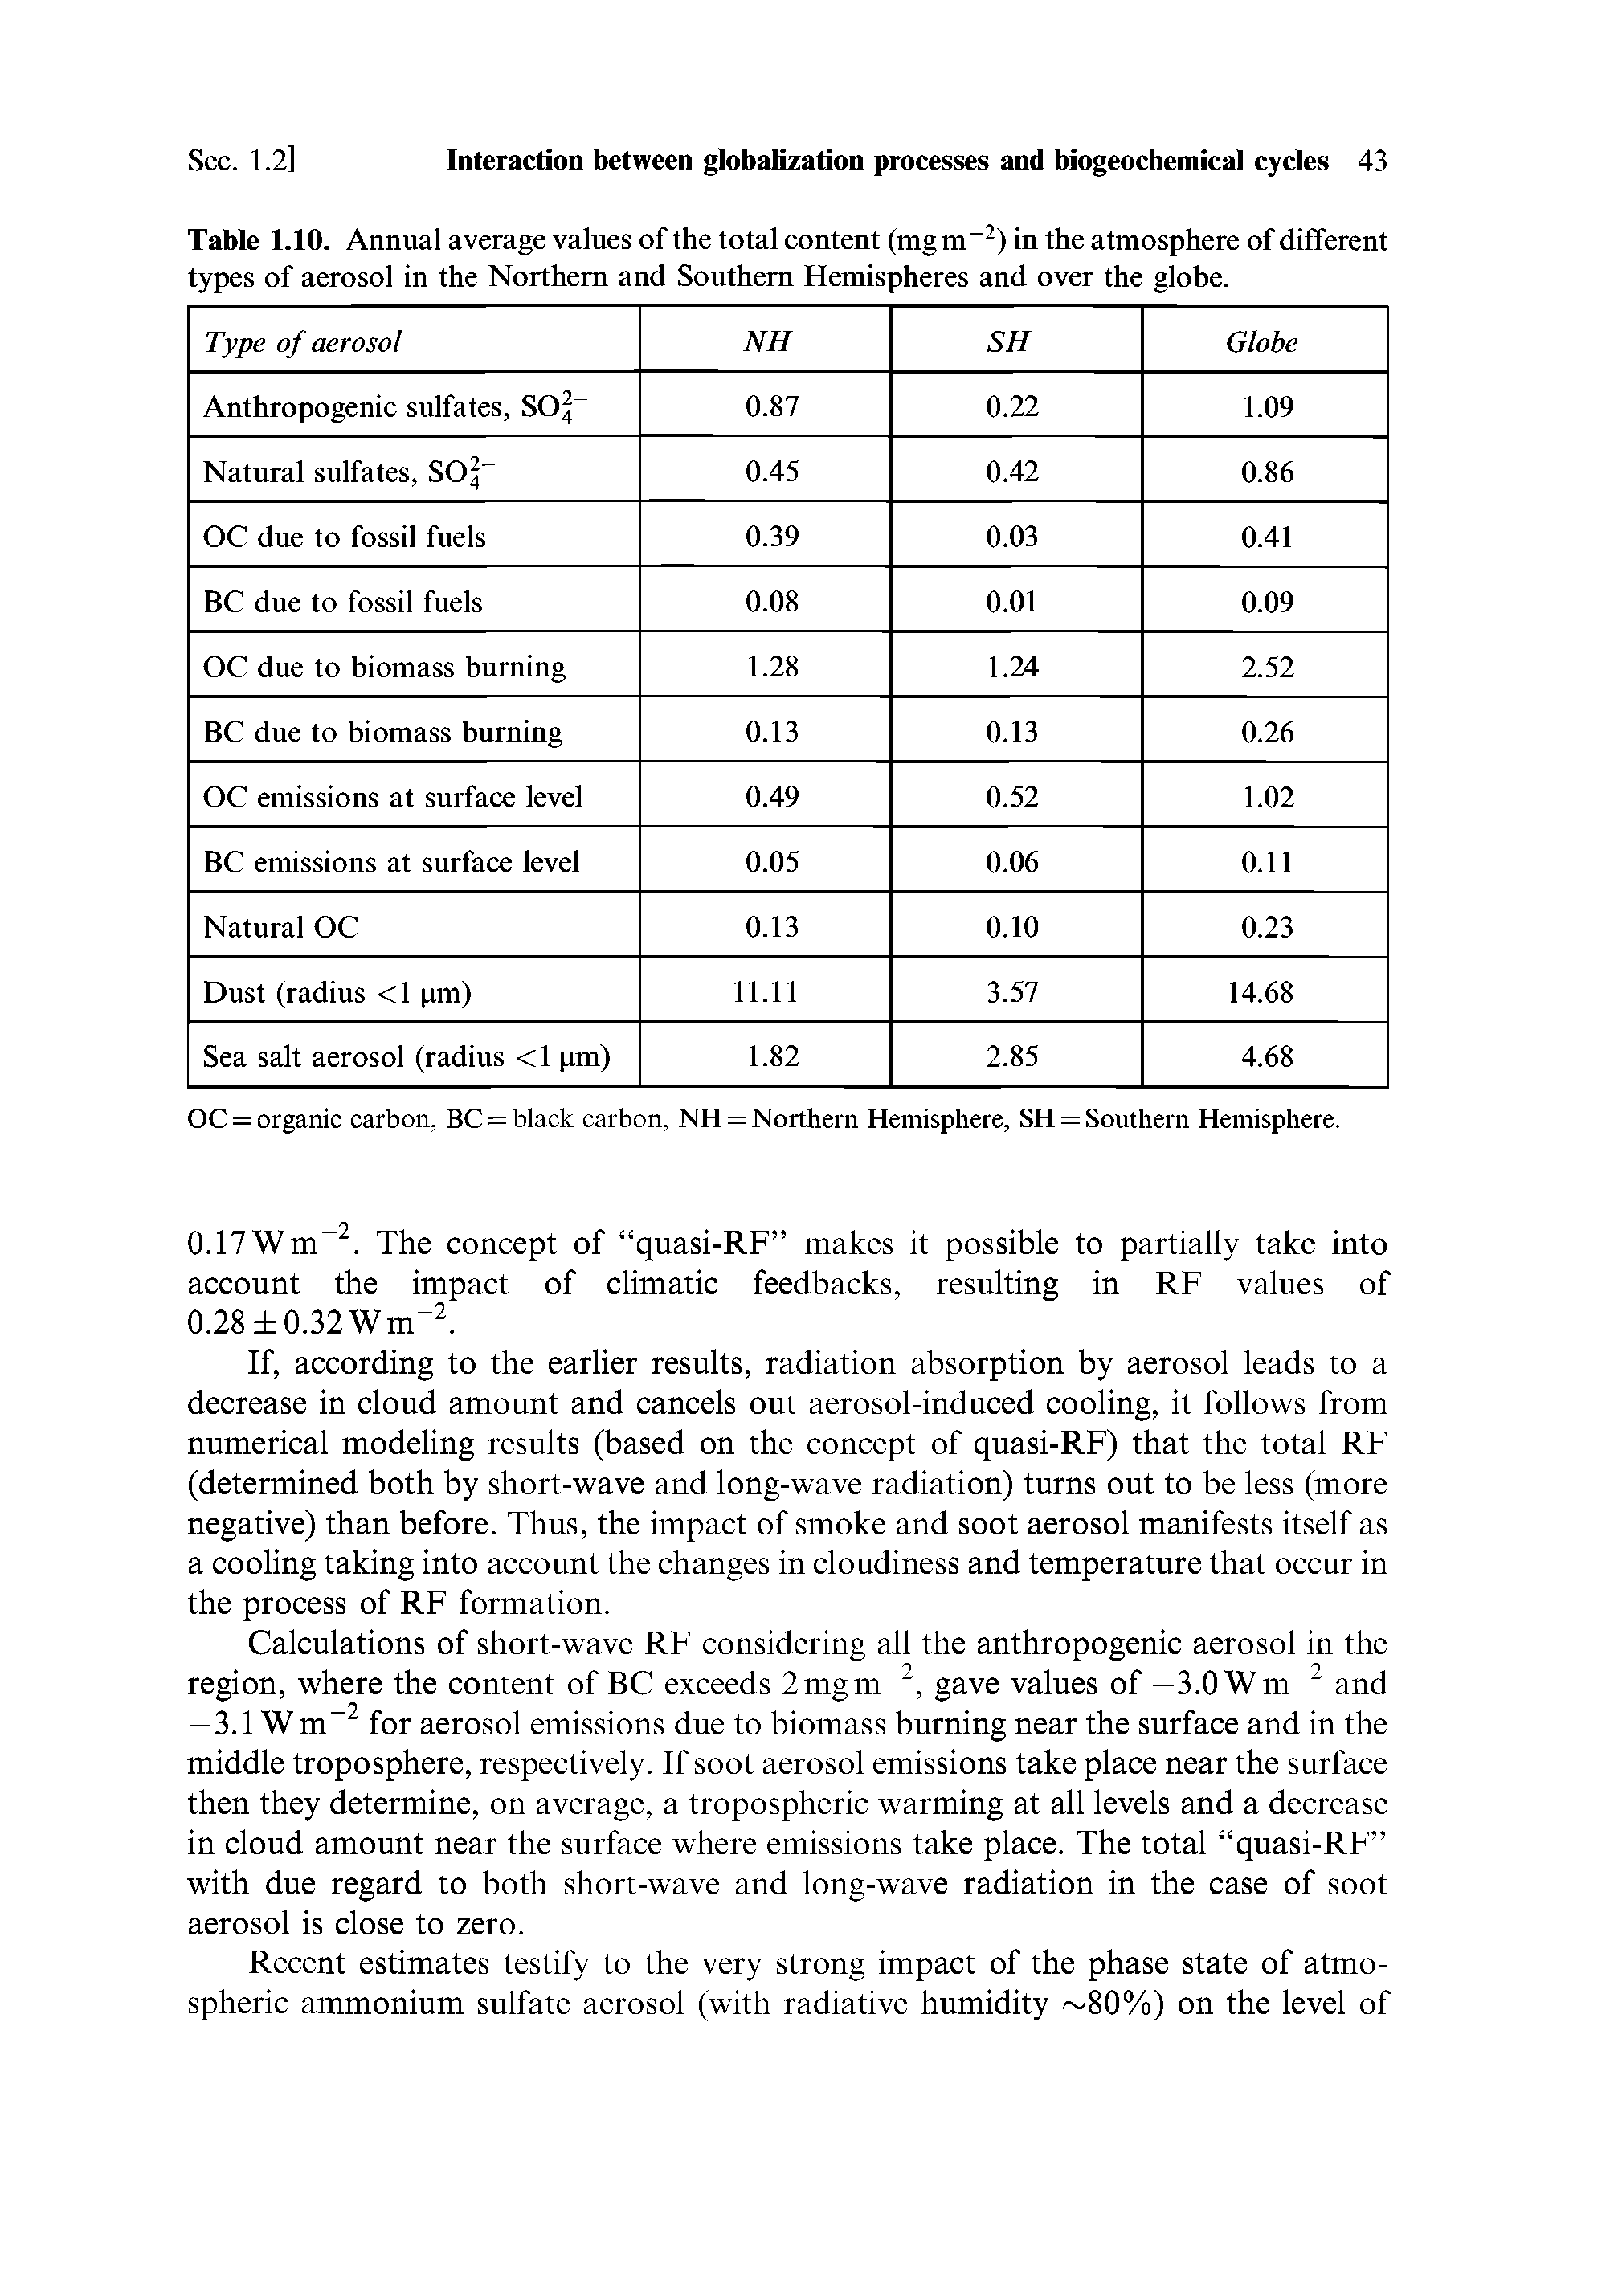 Table 1.10. Annual average values of the total content (mg m 2) in the atmosphere of different types of aerosol in the Northern and Southern Hemispheres and over the globe.